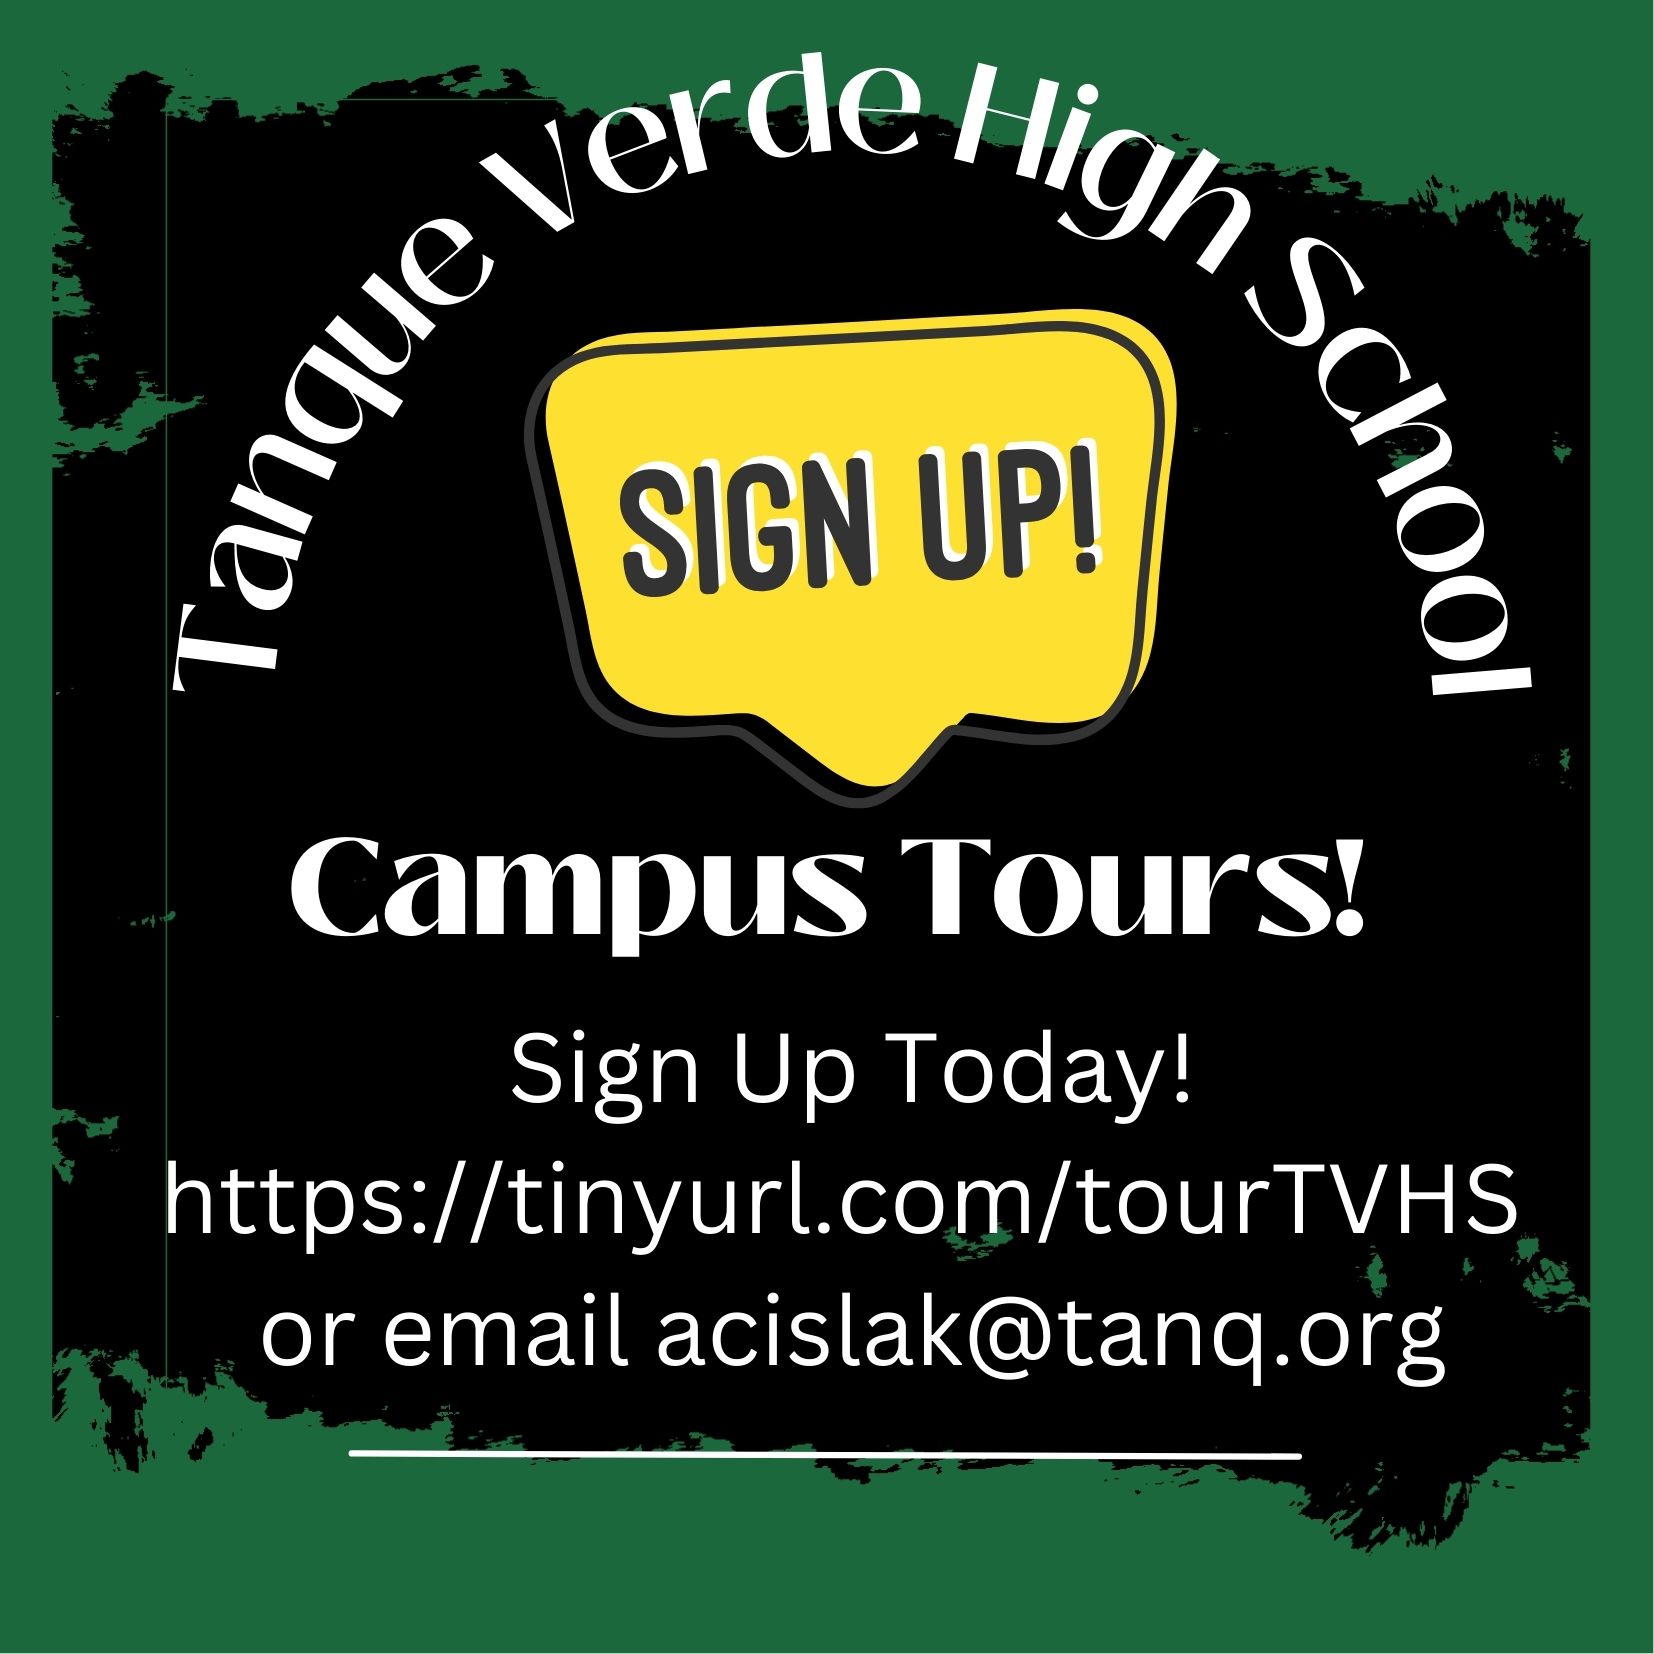 Campus tours information - click to sign up